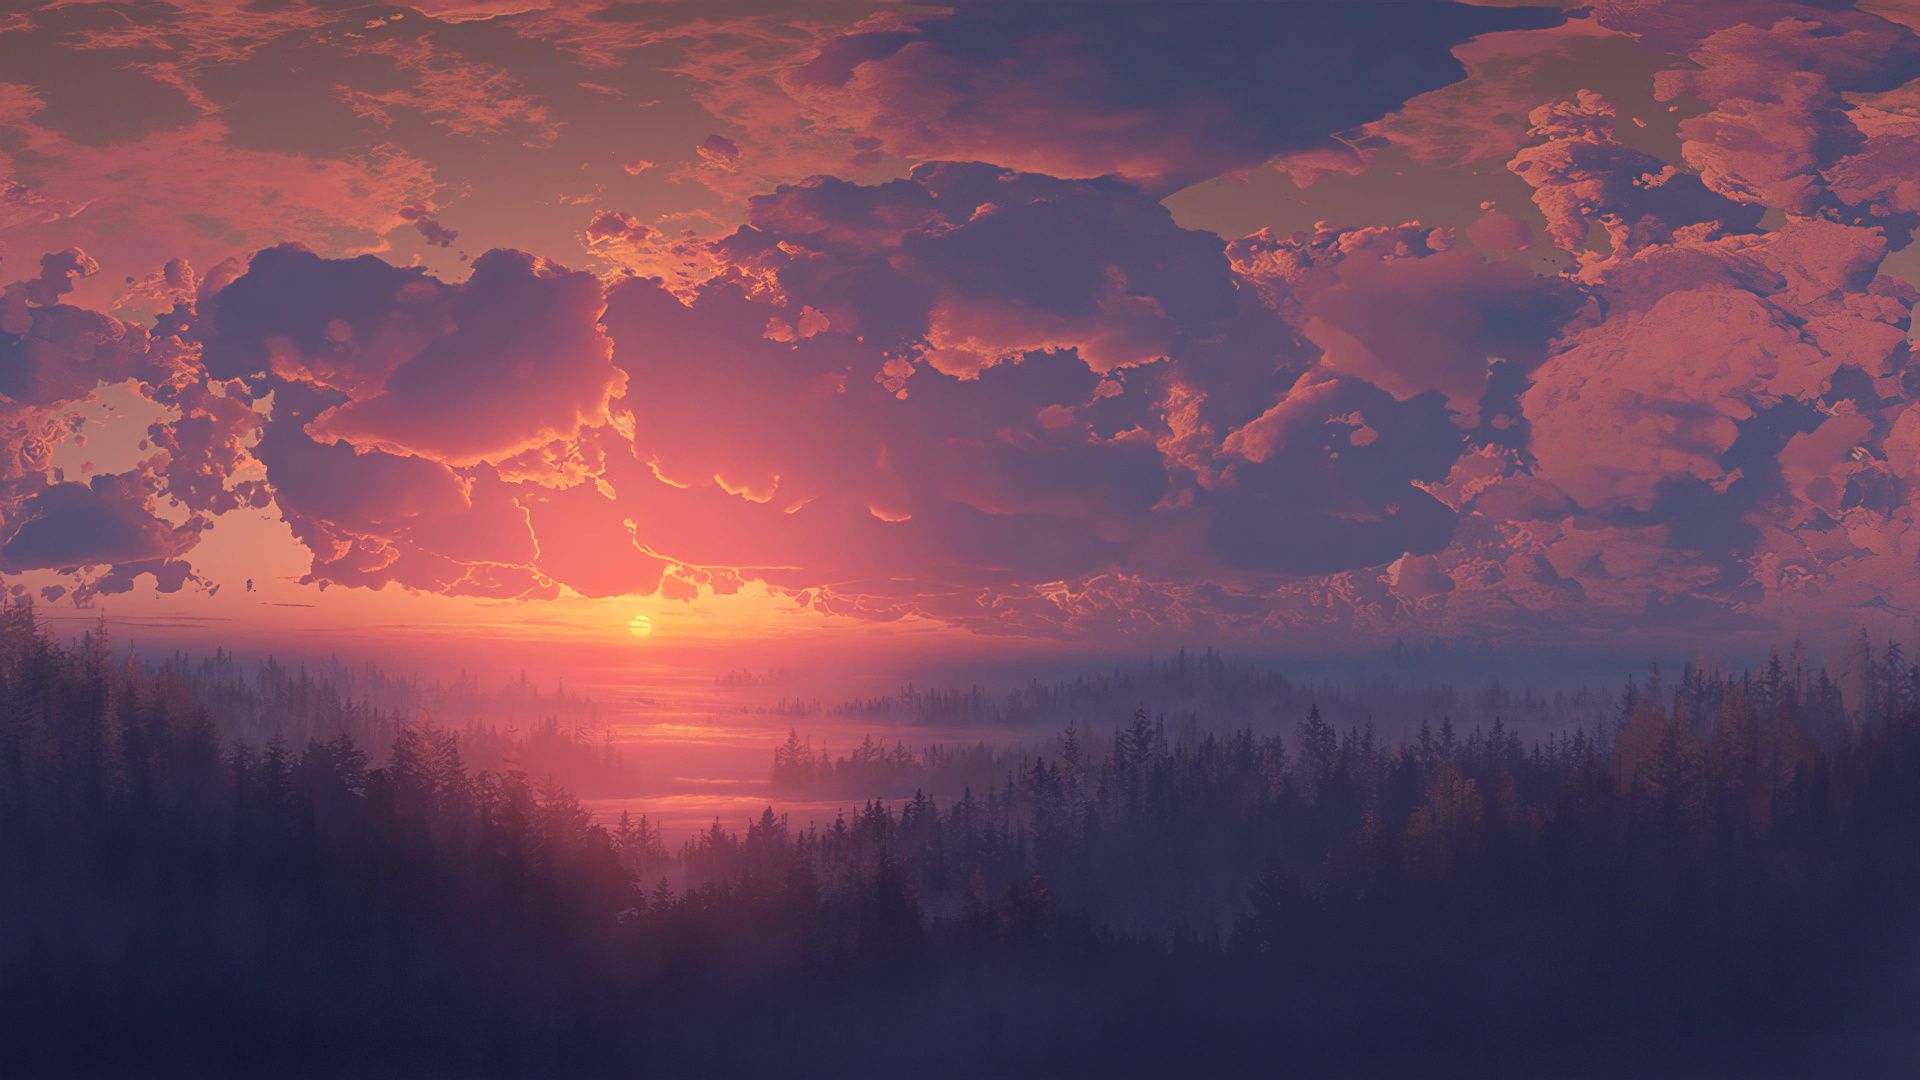 A sunset over a forest, with pink and purple clouds. - Computer